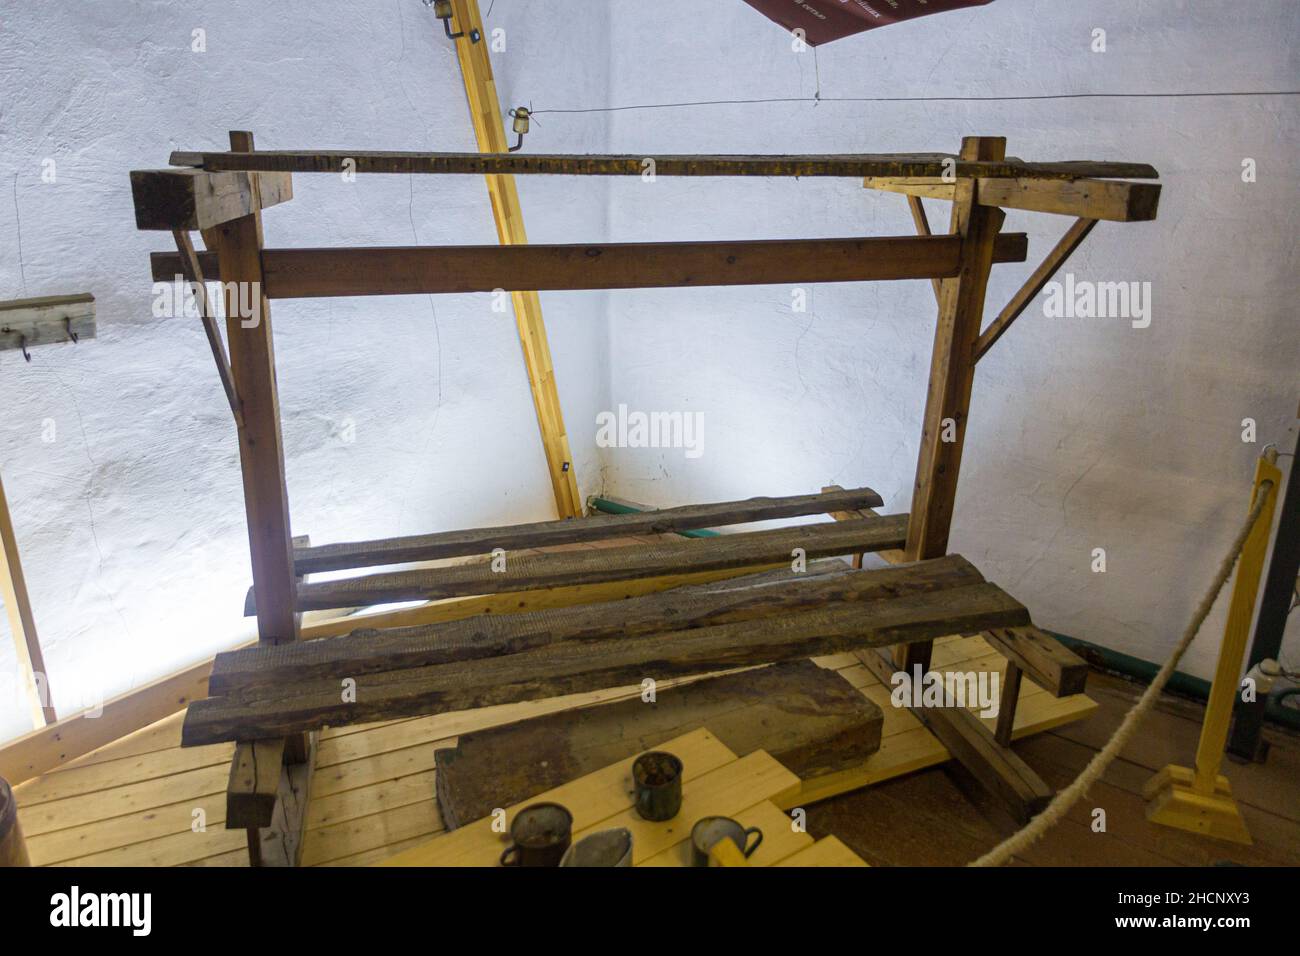 PERM KRAI, RUSSIA - JULY 1, 2018: Exhibit of a bed in the Museum of the History of Political Repression Perm-36 Gulag Museum , Russia Stock Photo